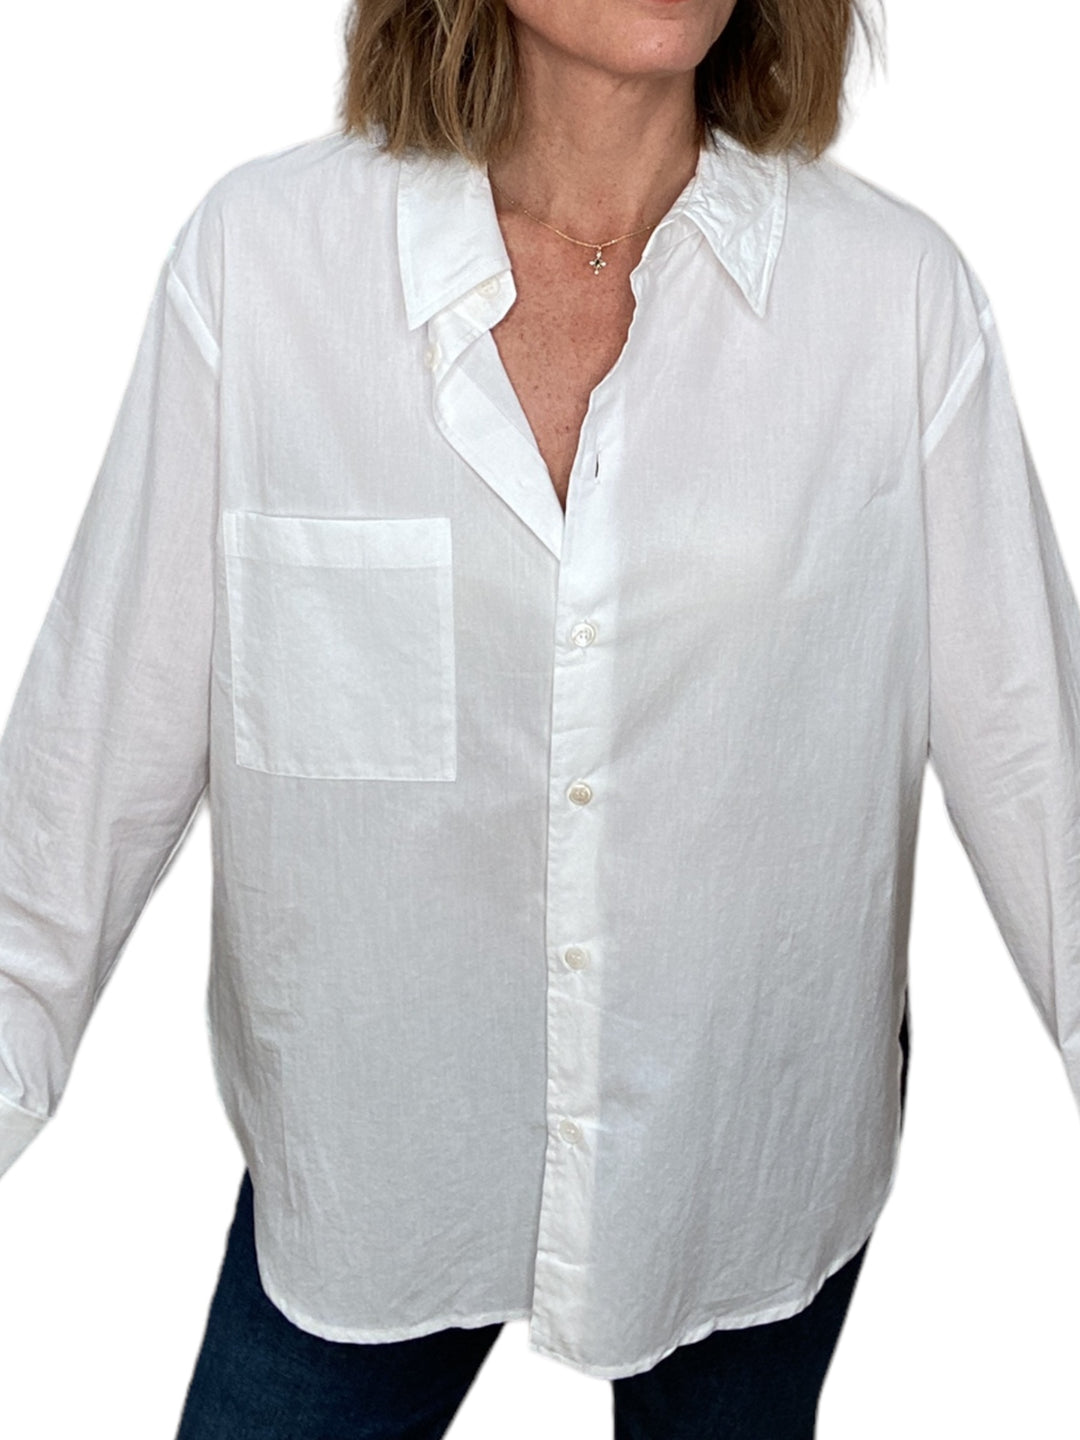 OVERSIZED BUTTON DOWN-WHITE - Kingfisher Road - Online Boutique